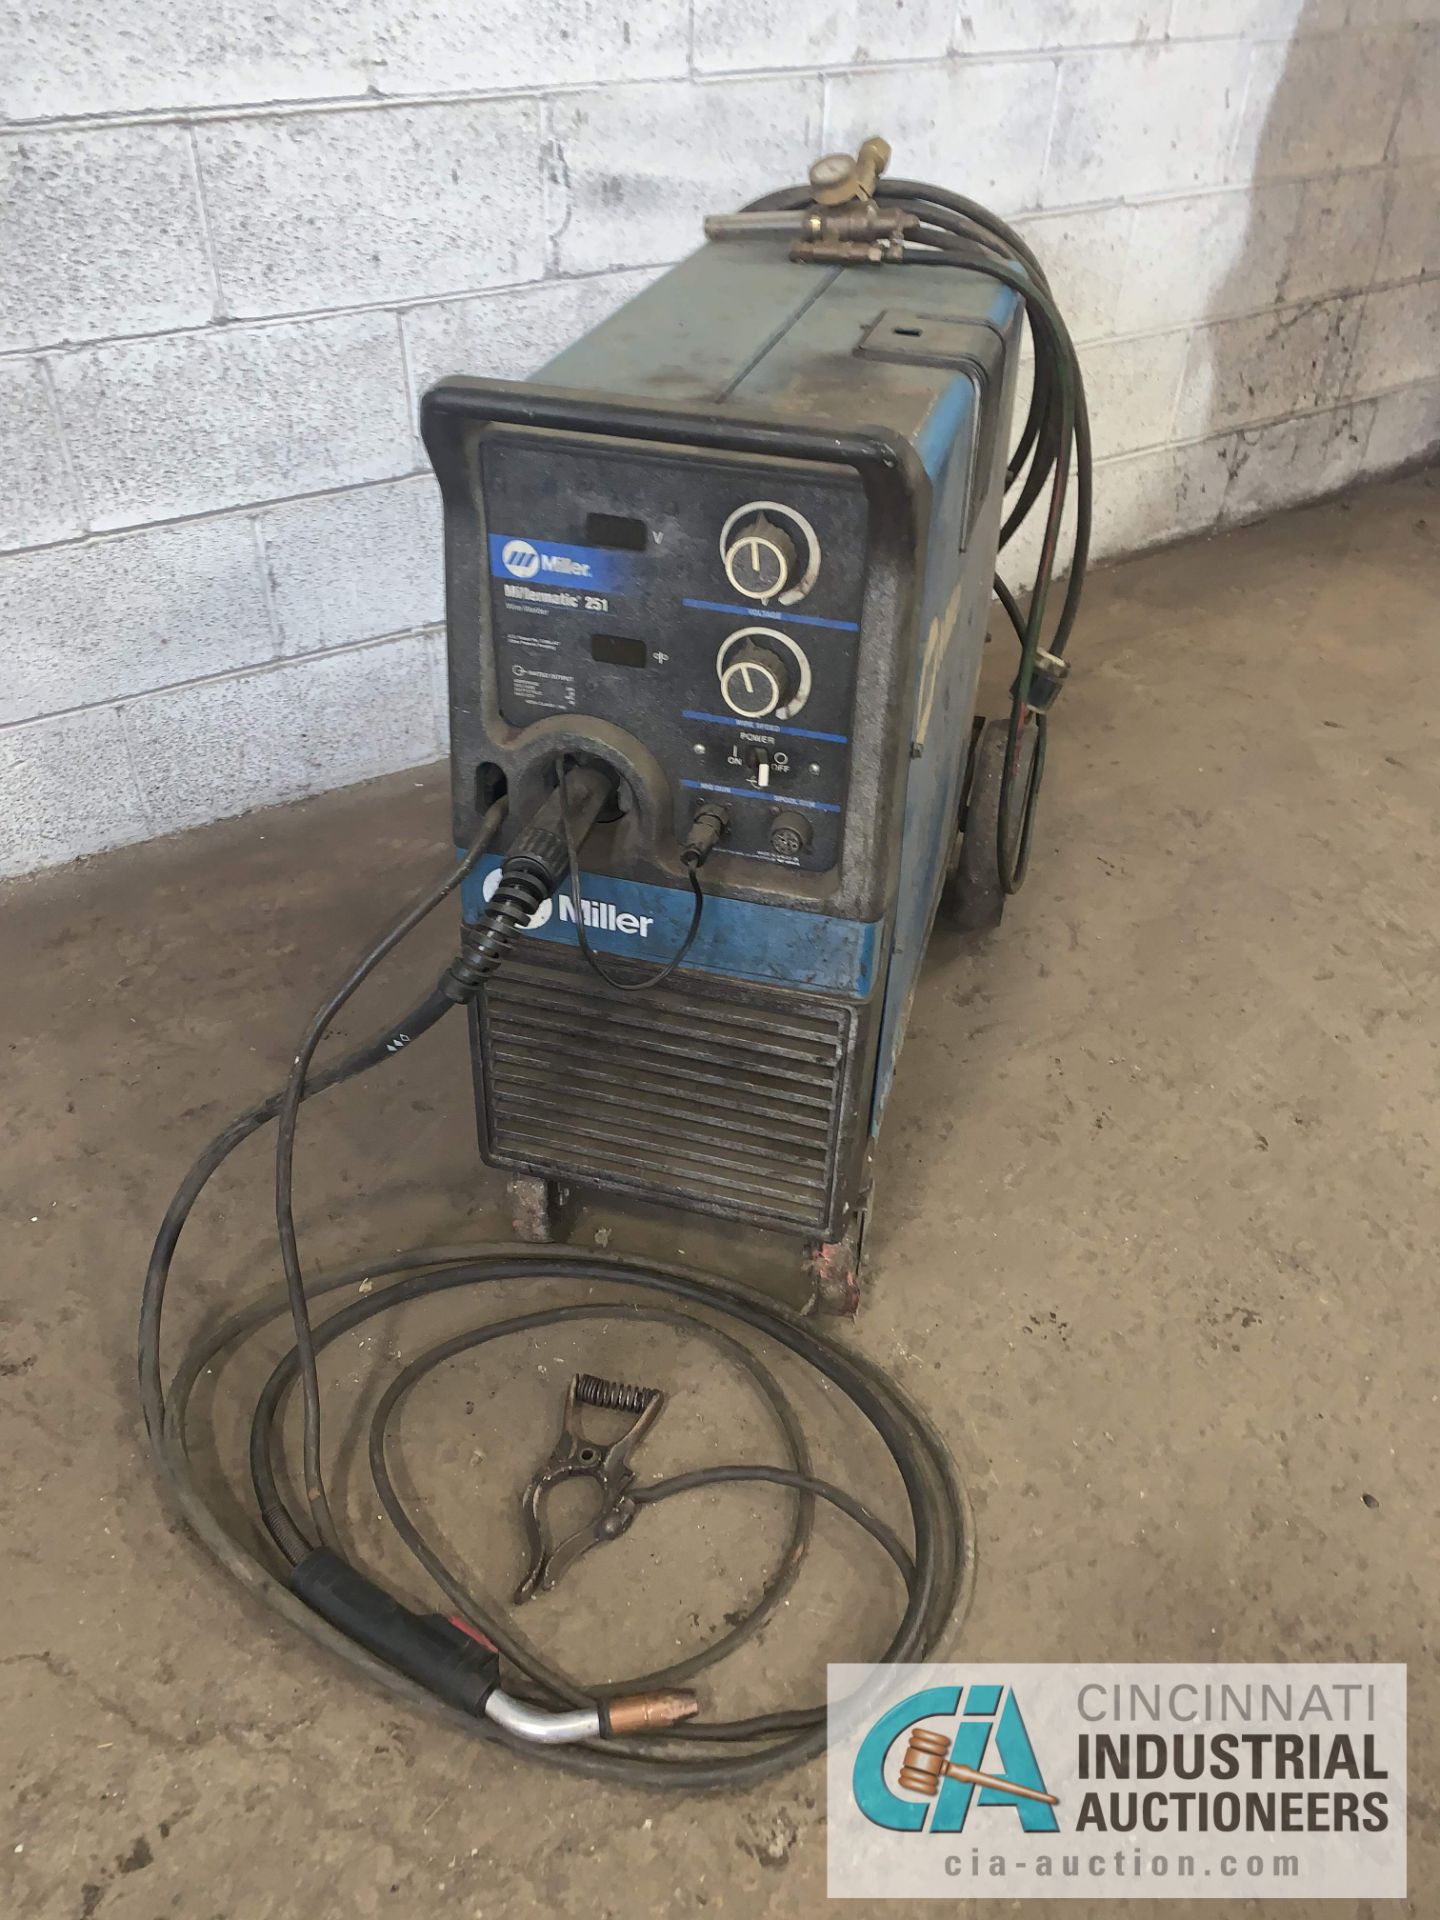 MILLER MILLERMATIC 251 WELDER - $20.00 Rigging Fee Due to Onsite Rigger - Located in Toledo, Ohio - Image 3 of 3